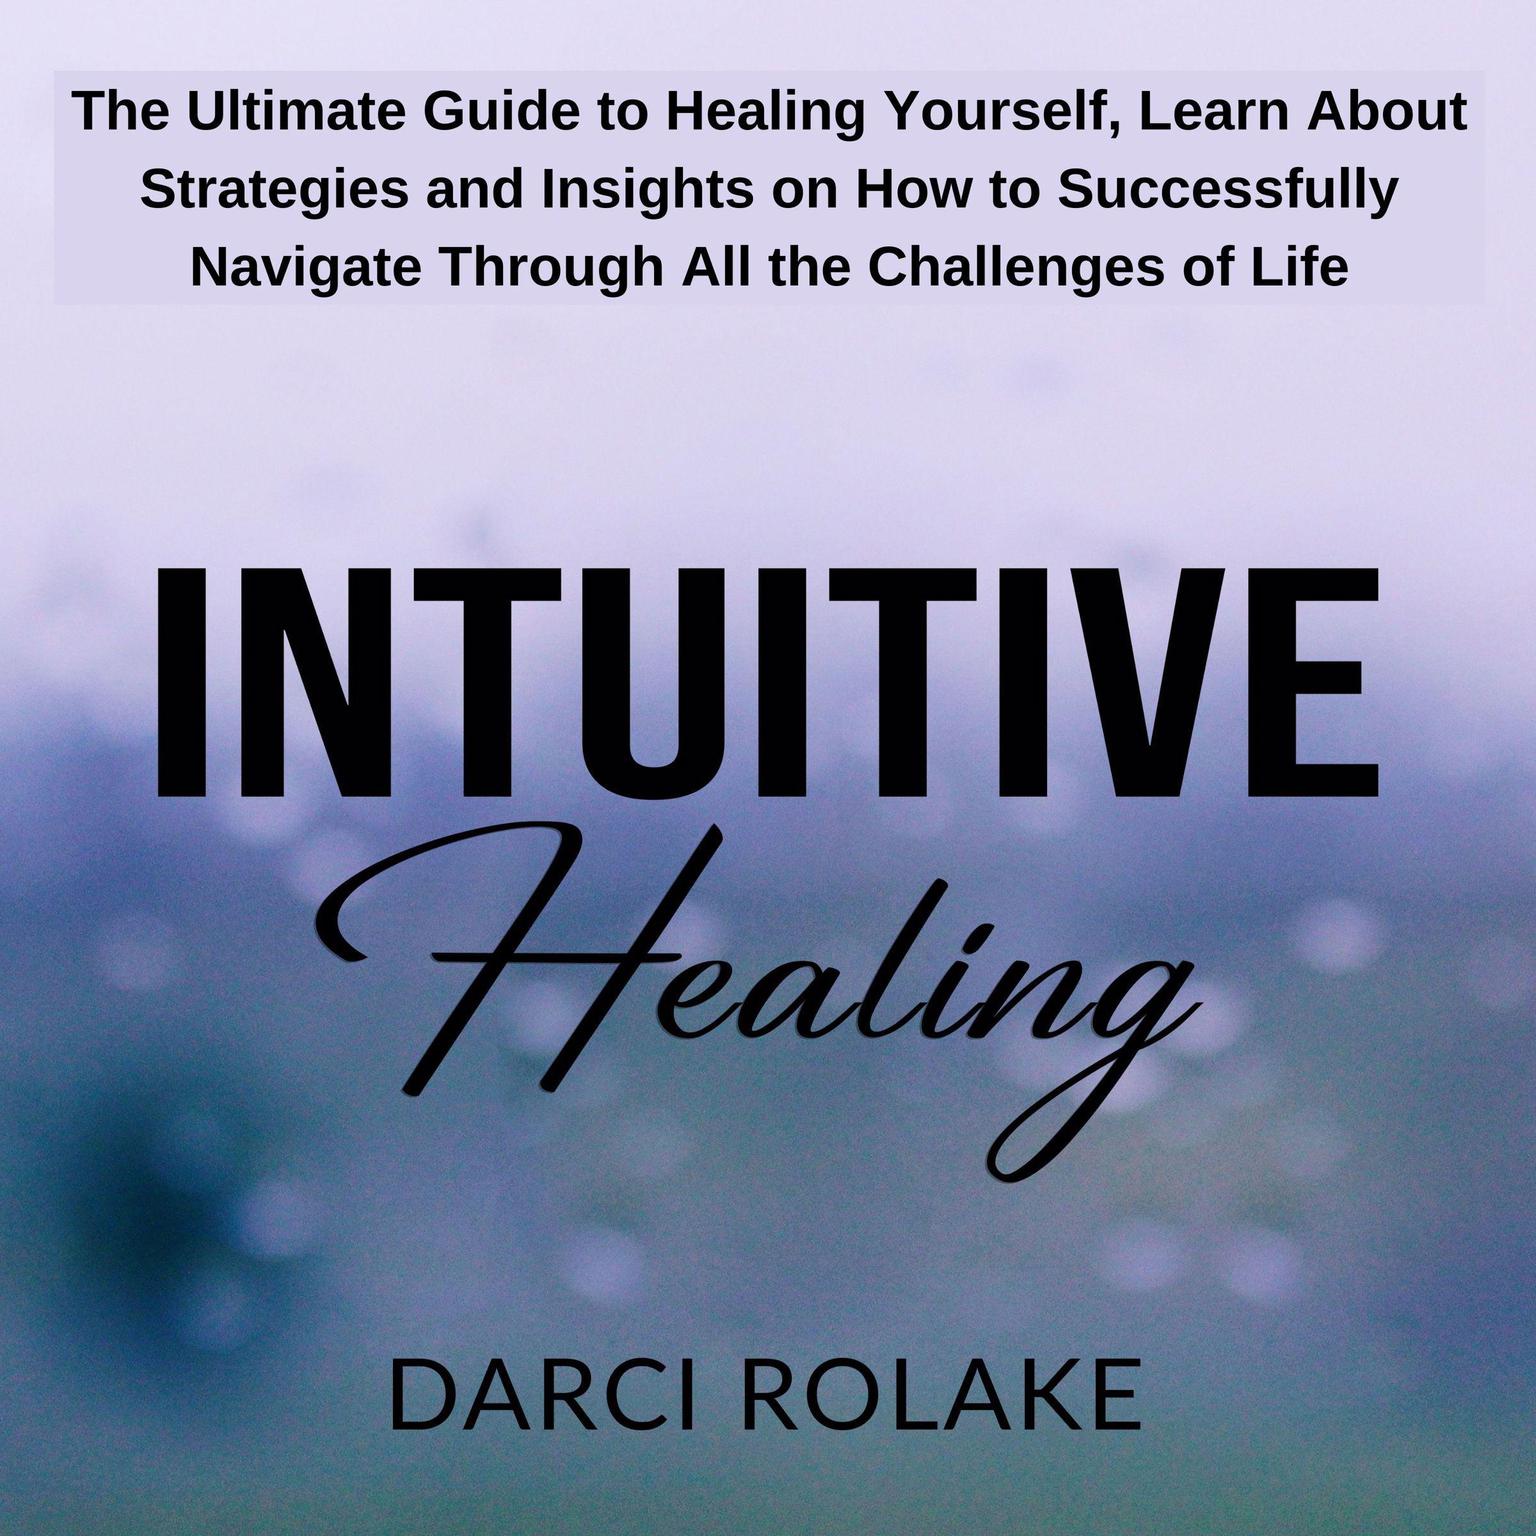 Intuitive Healing: The Ultimate Guide to Healing Yourself, Learn About Strategies and Insights on How to Successfully Navigate Through All the Challenges of Life Audiobook, by Darci Rolake